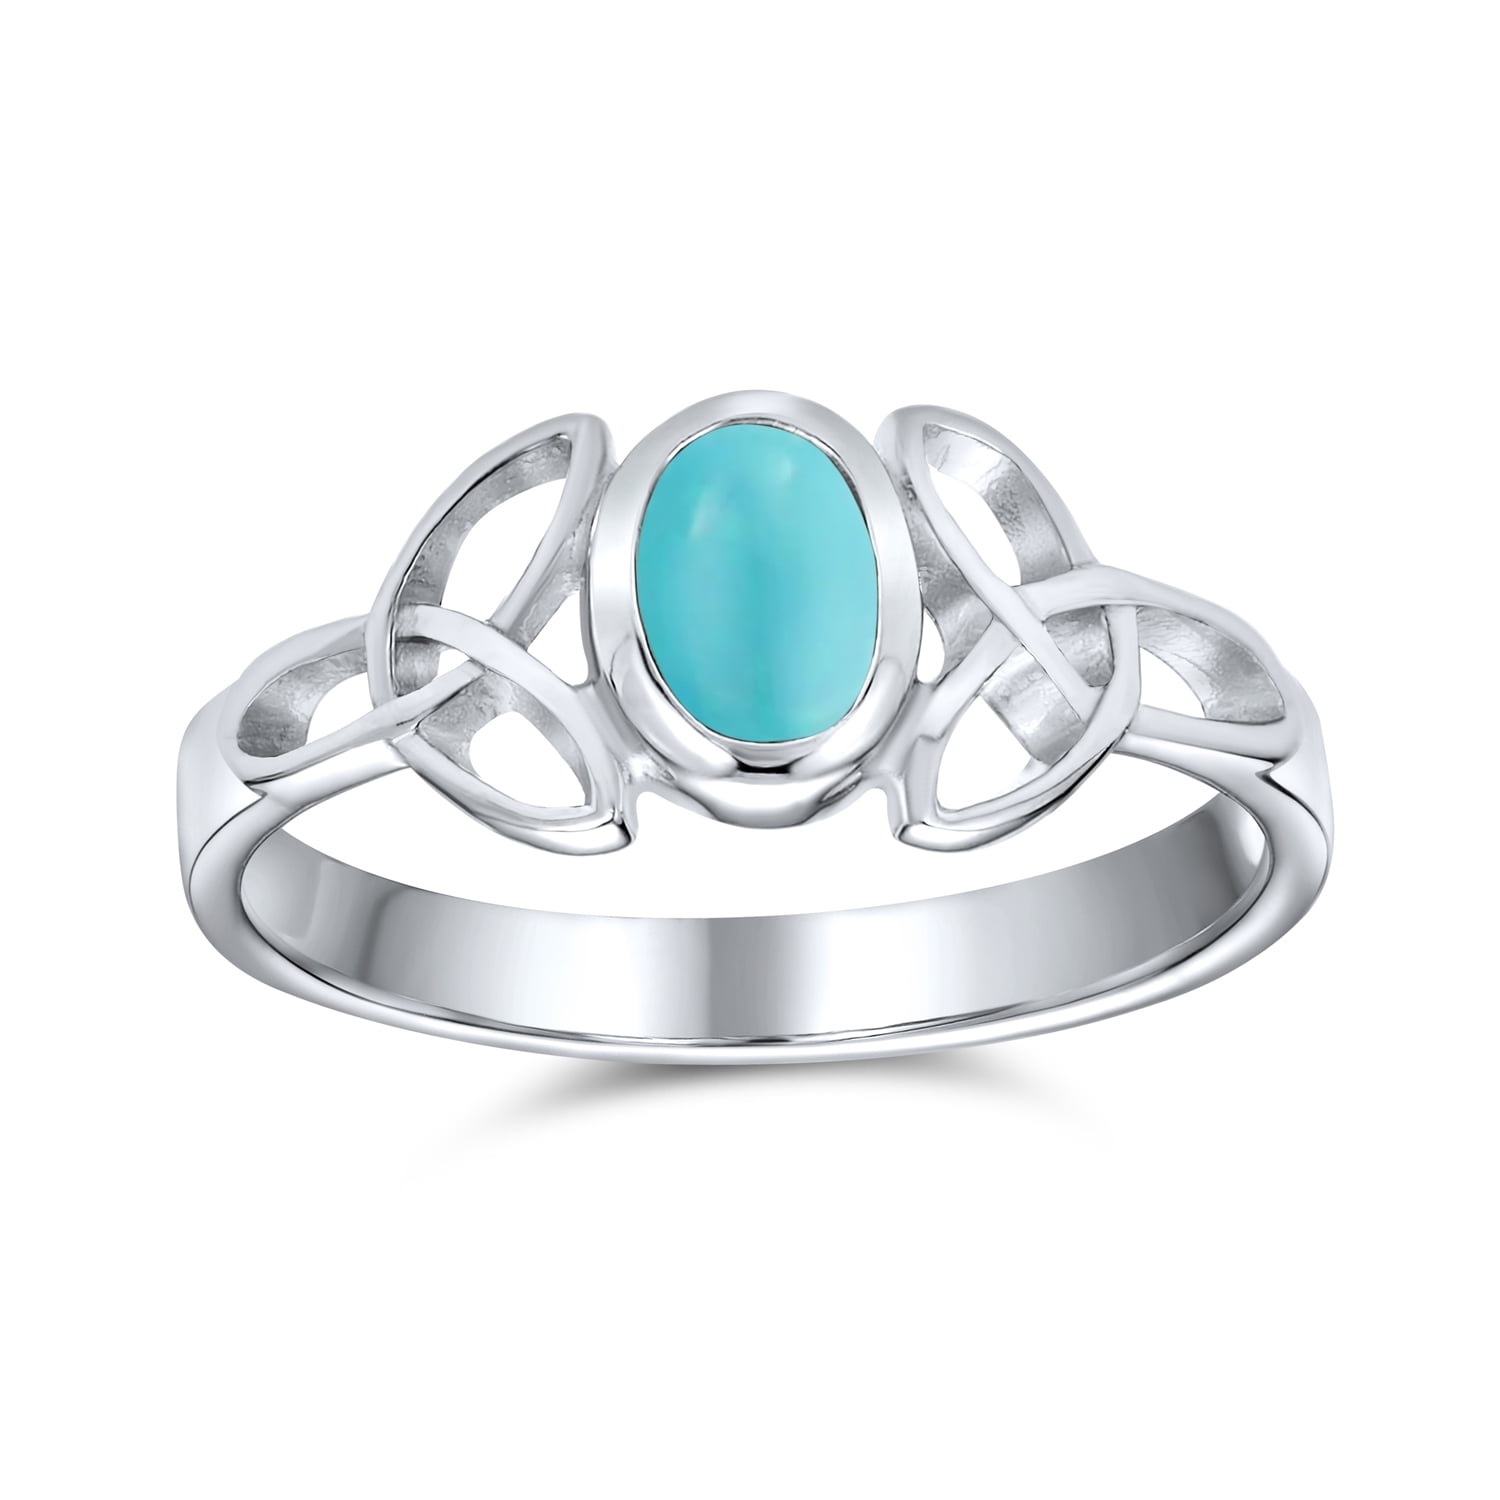 Turquoise Ring with a Sterling Silver Twist Band